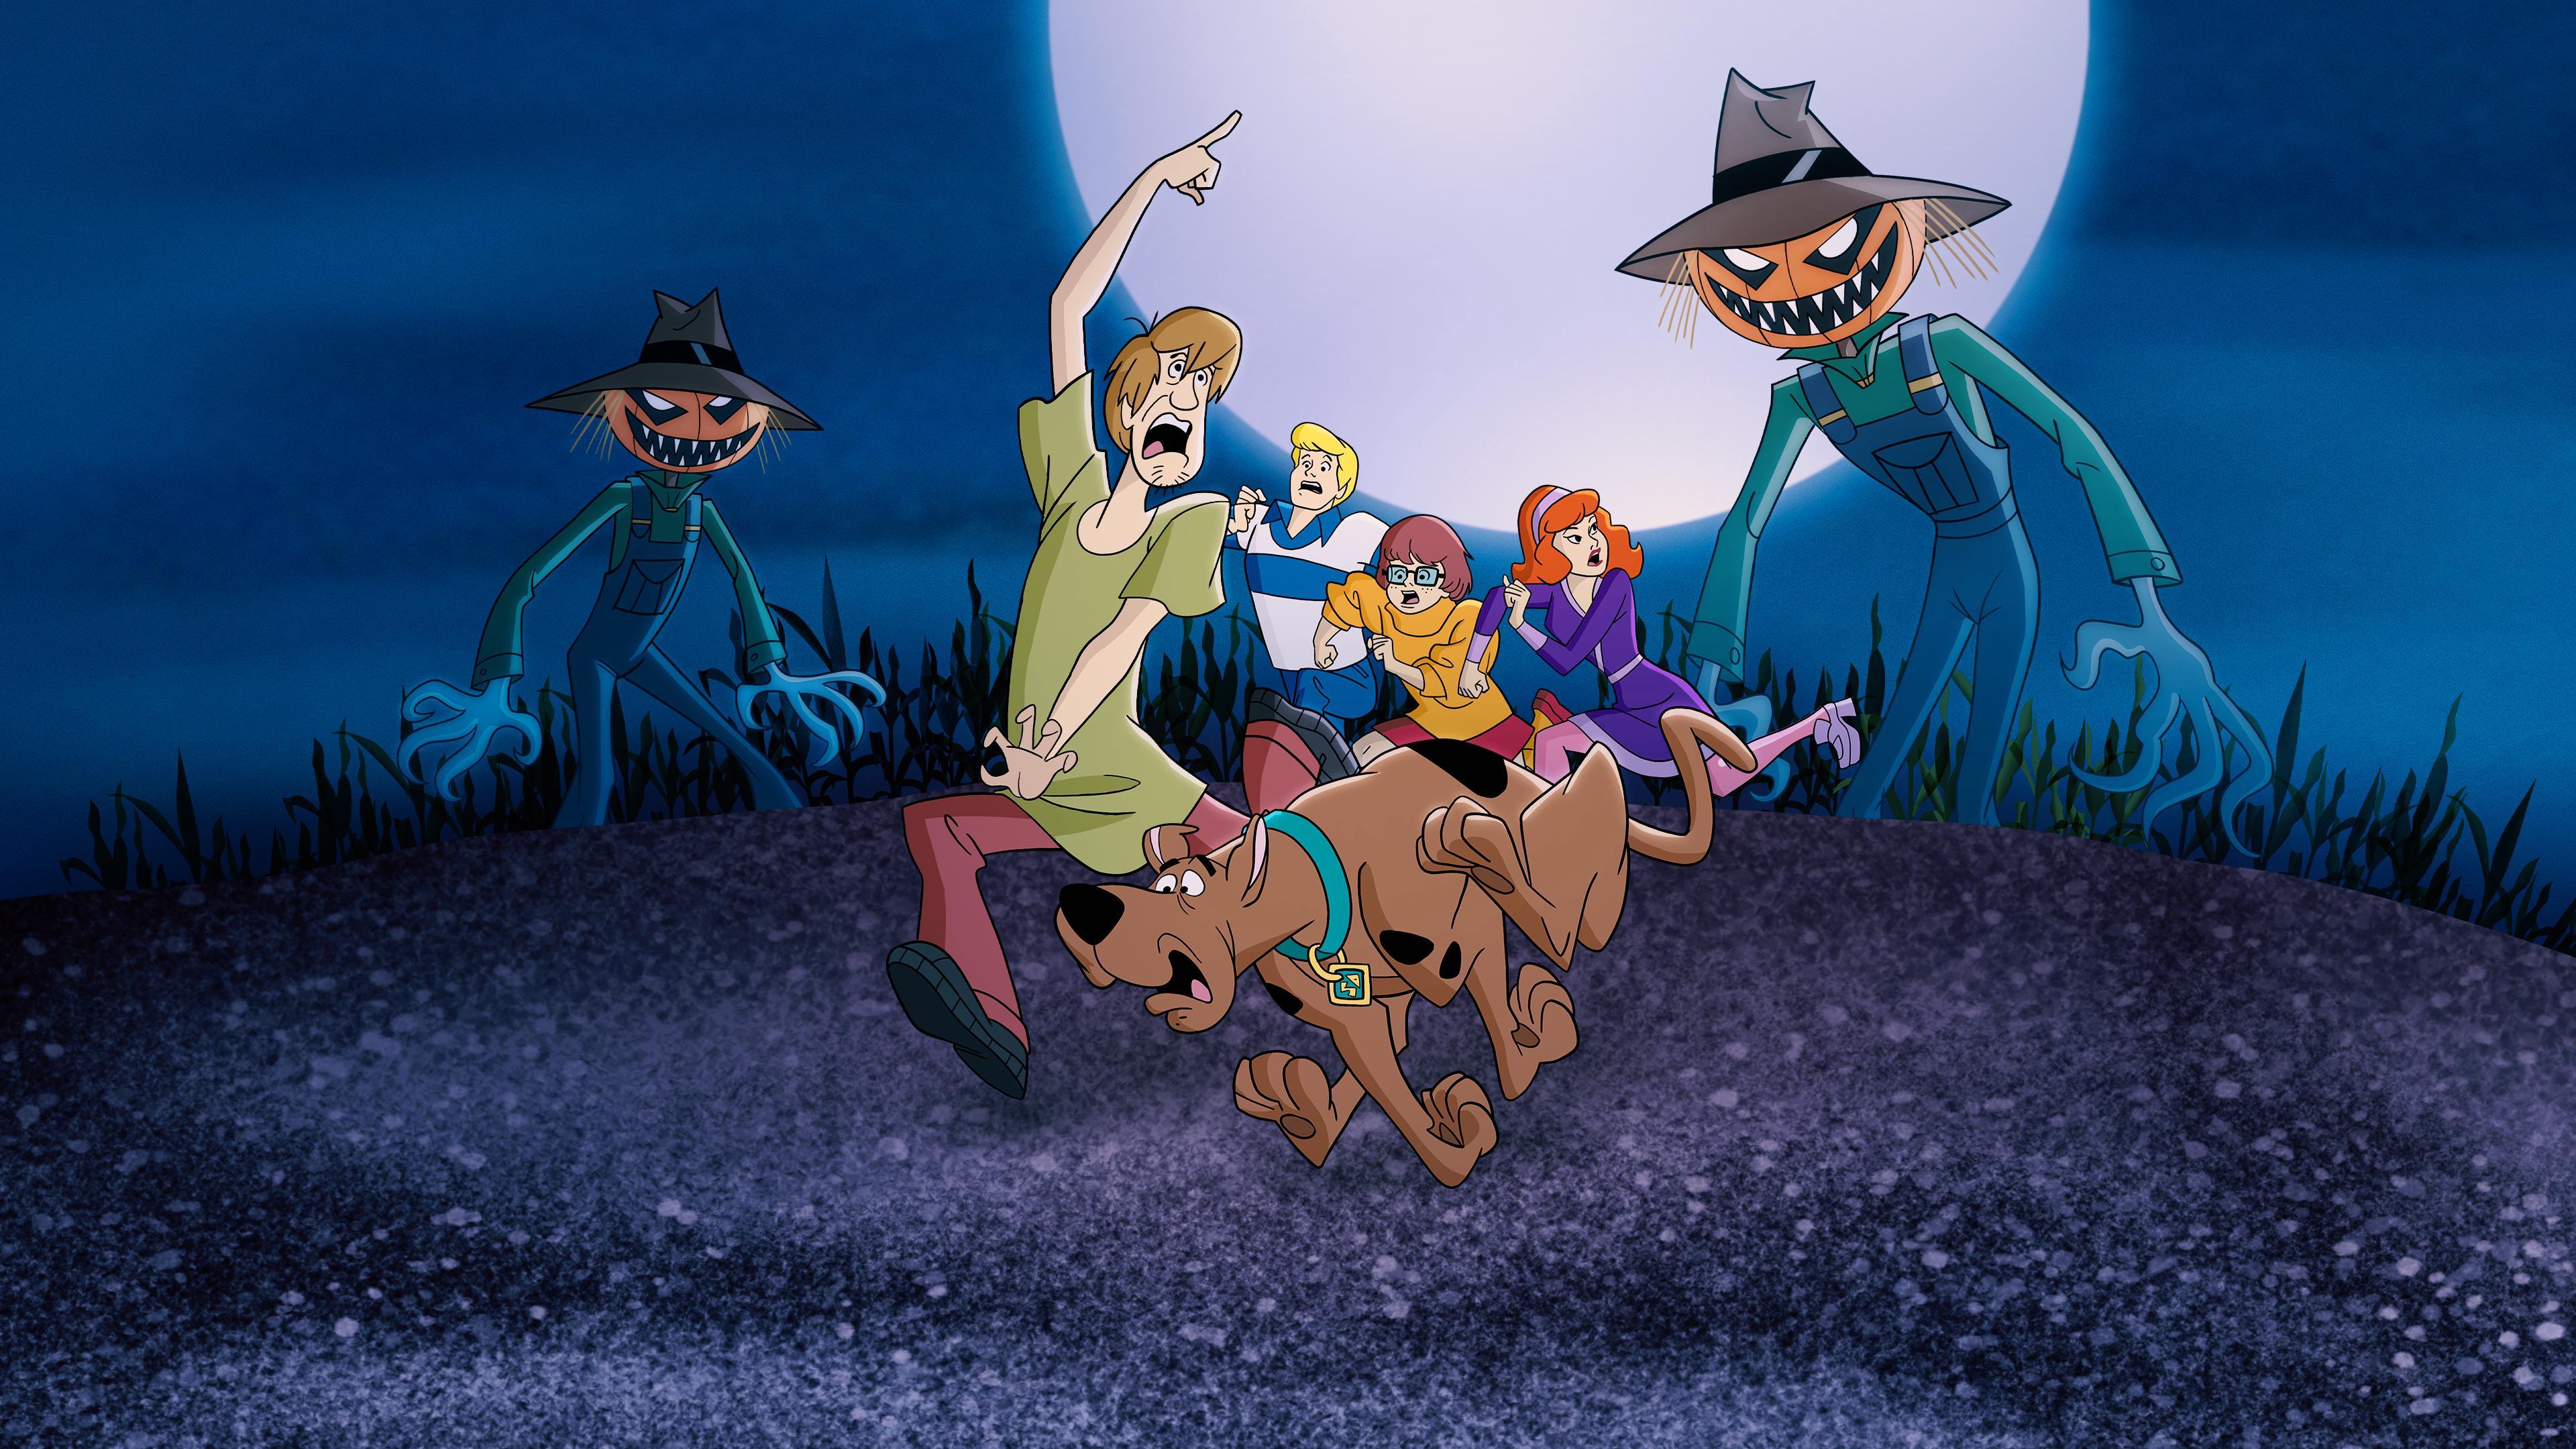 TV Show What's New, Scooby-Doo? HD Wallpaper | Background Image